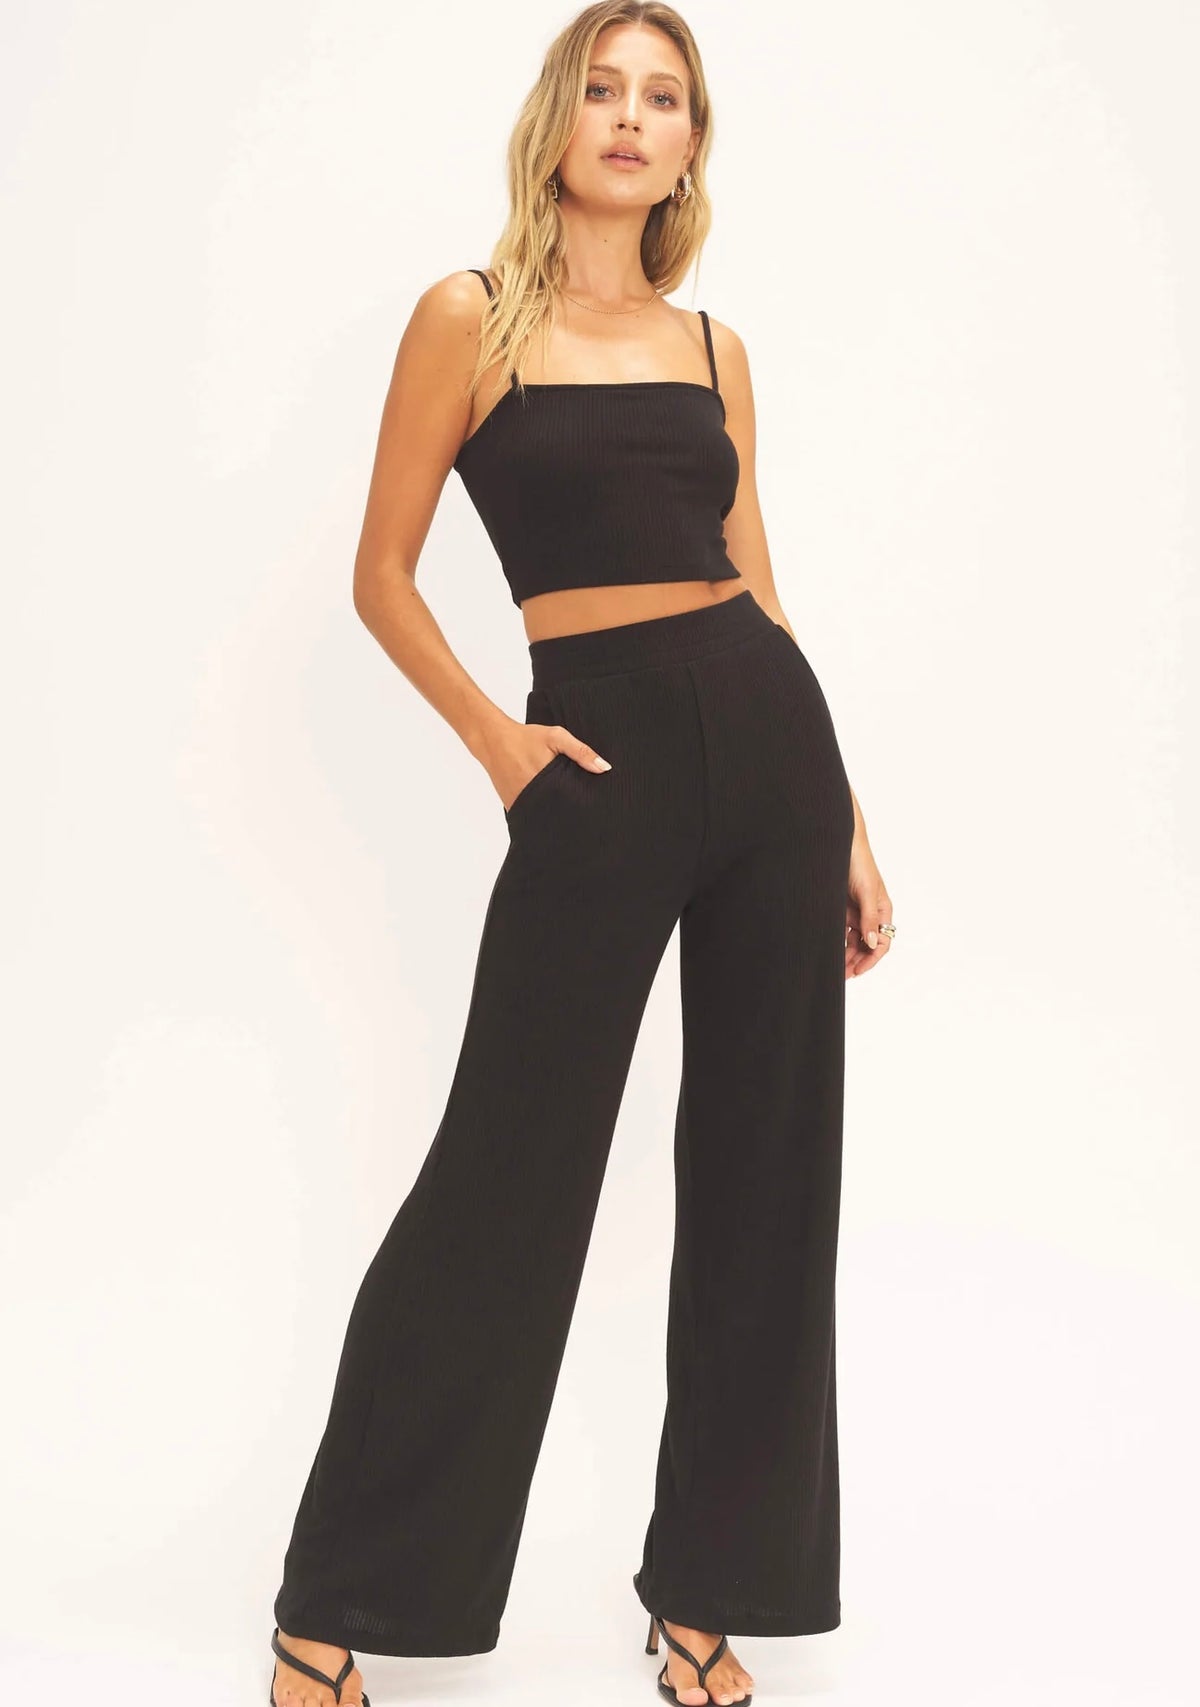 PROJECT SOCAIL T Stay Forever Rib Pant